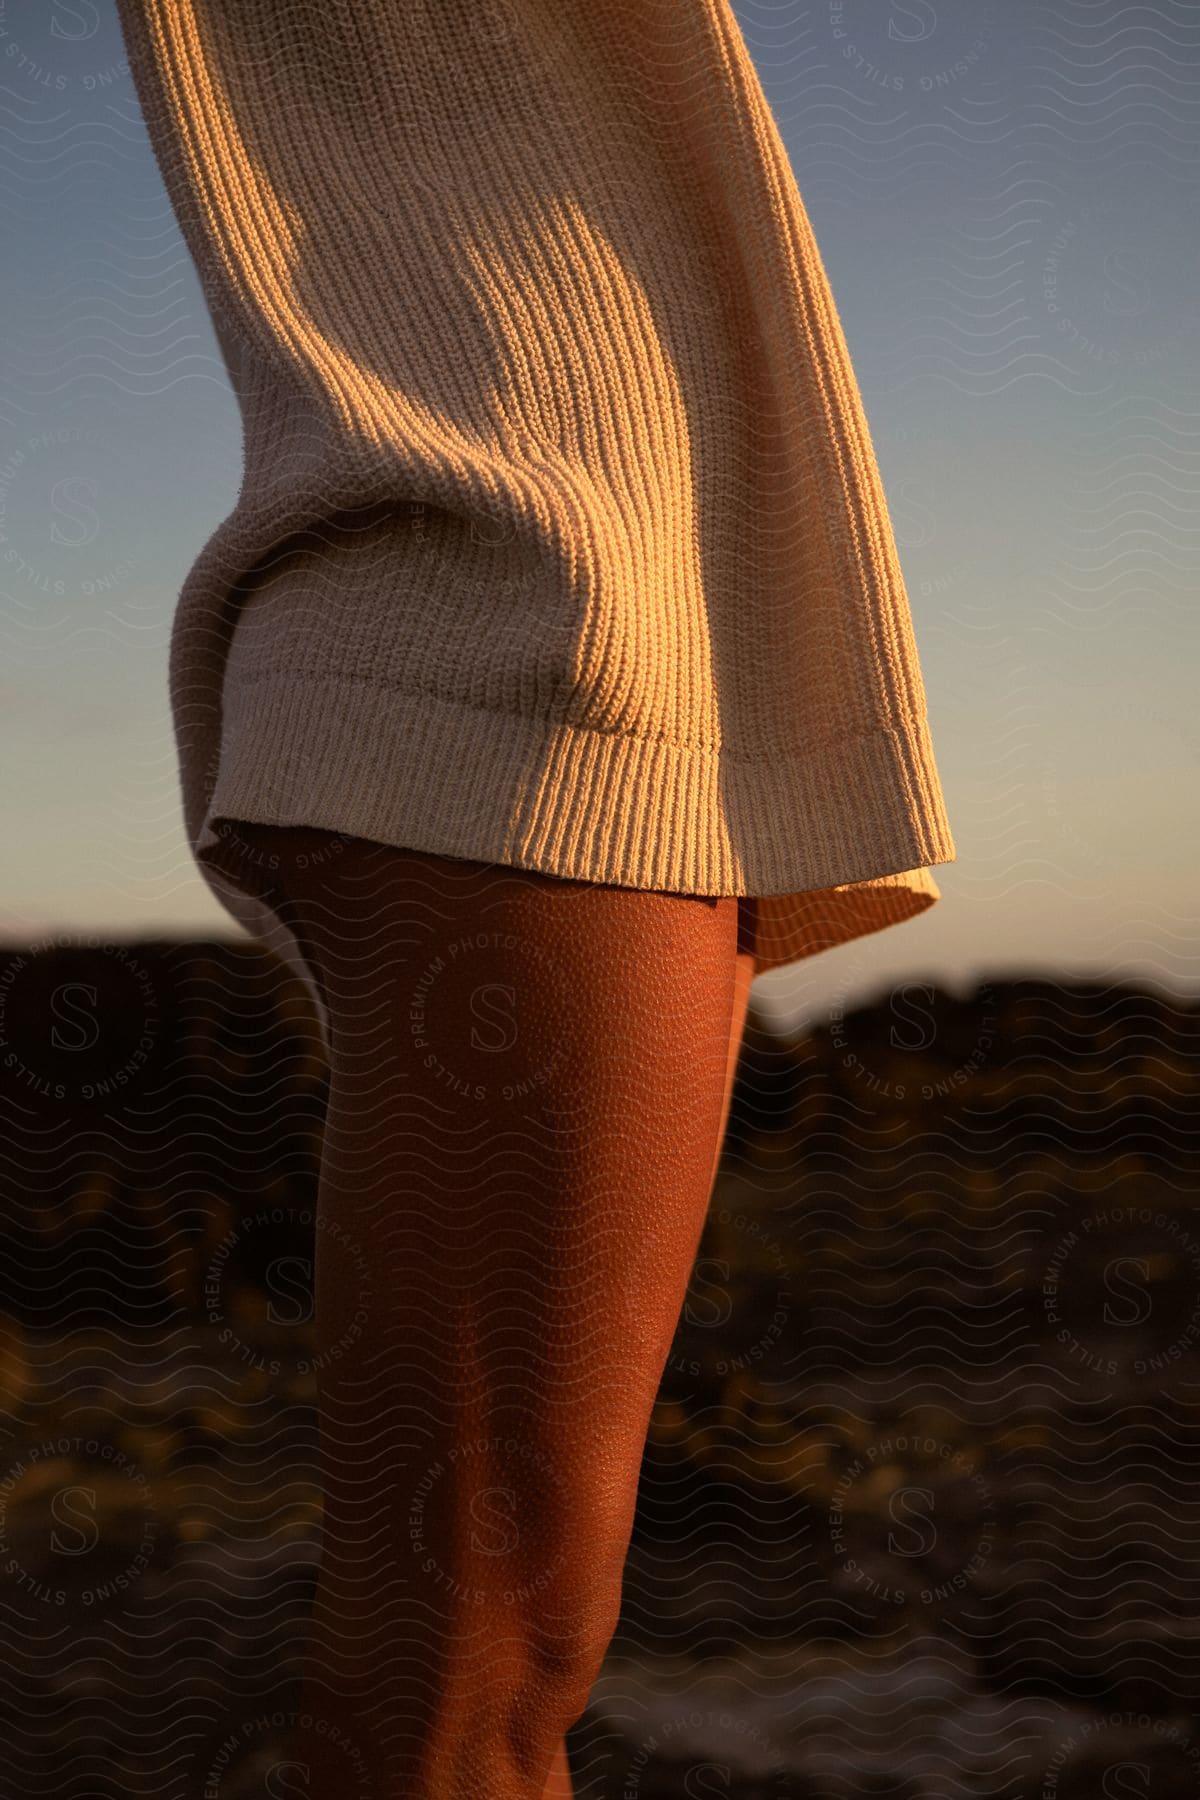 Woman wearing a white sweater and bikini stands on the coast watching the sunset